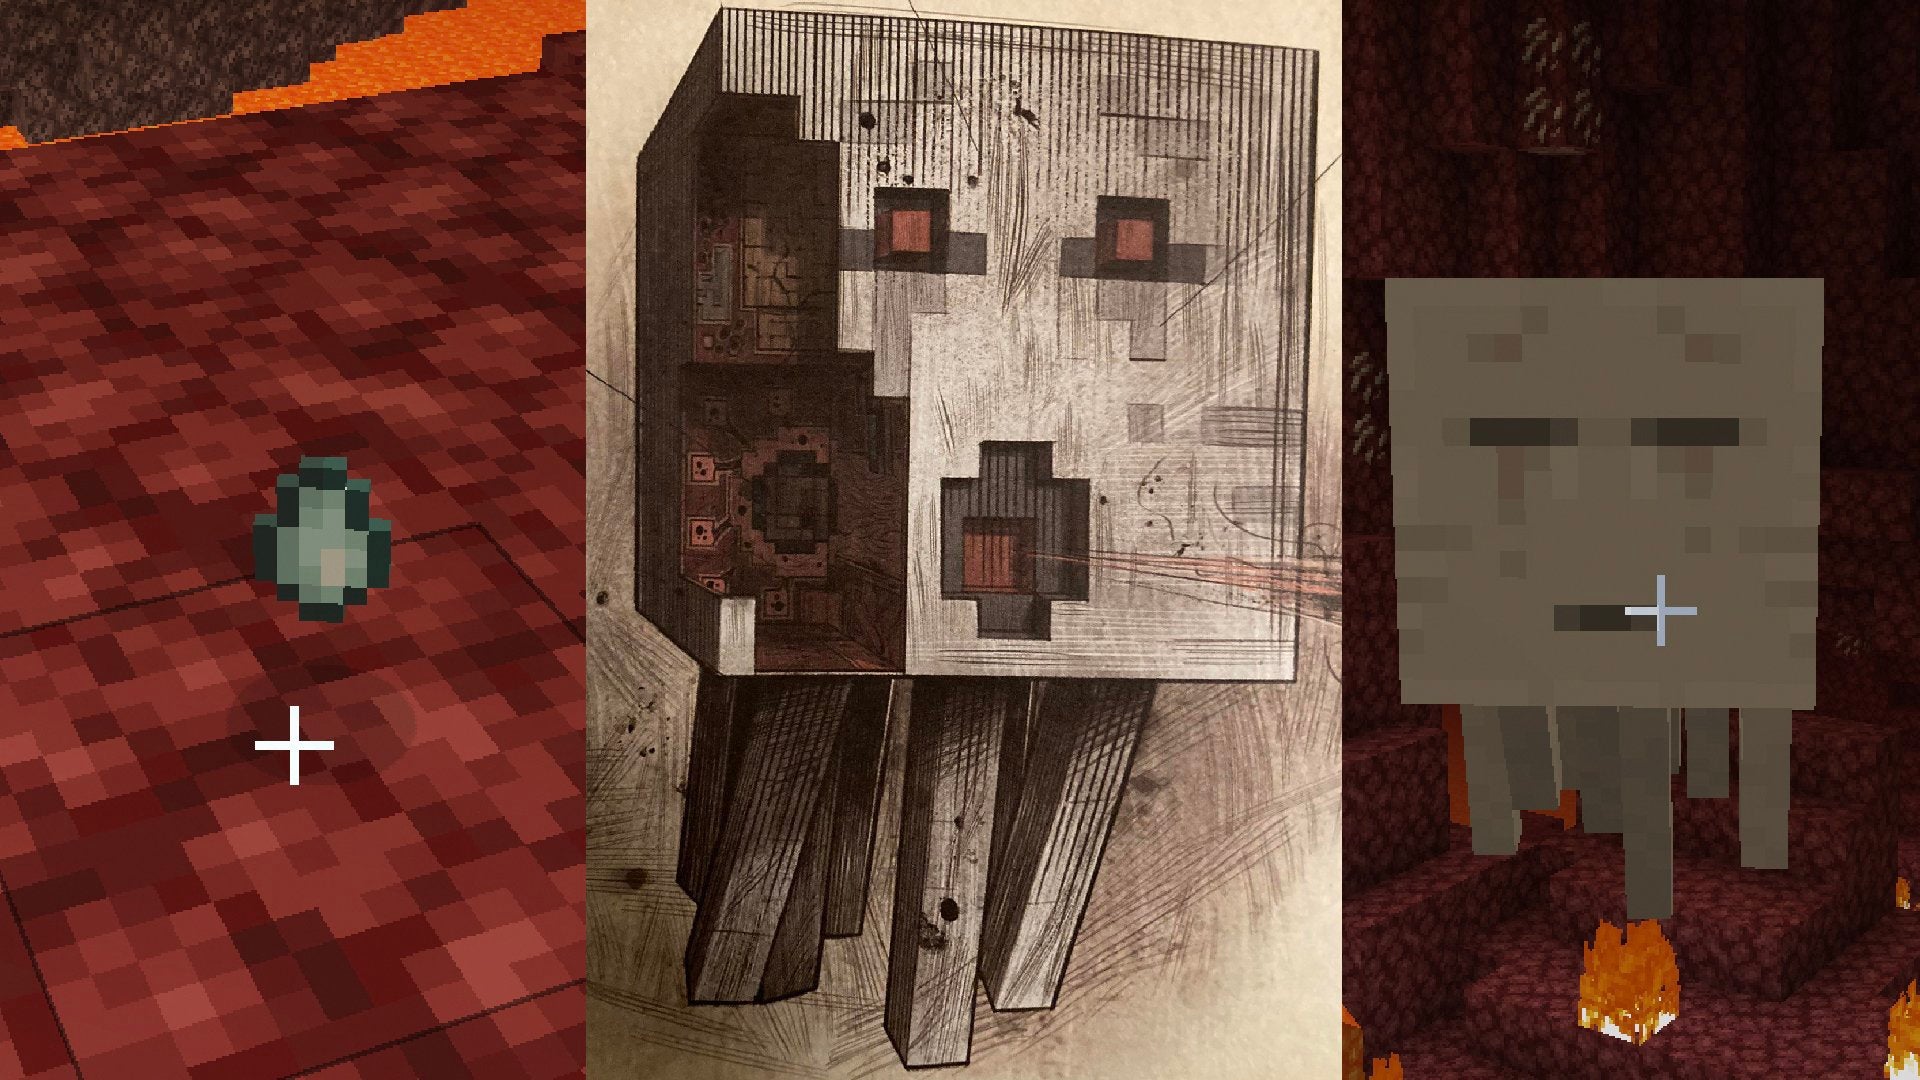 On the left is a Ghast Tear, in the center is an illustration of a Ghast in Minecraft: Mobestiary, and on the right is a Ghast flying around in the Nether.